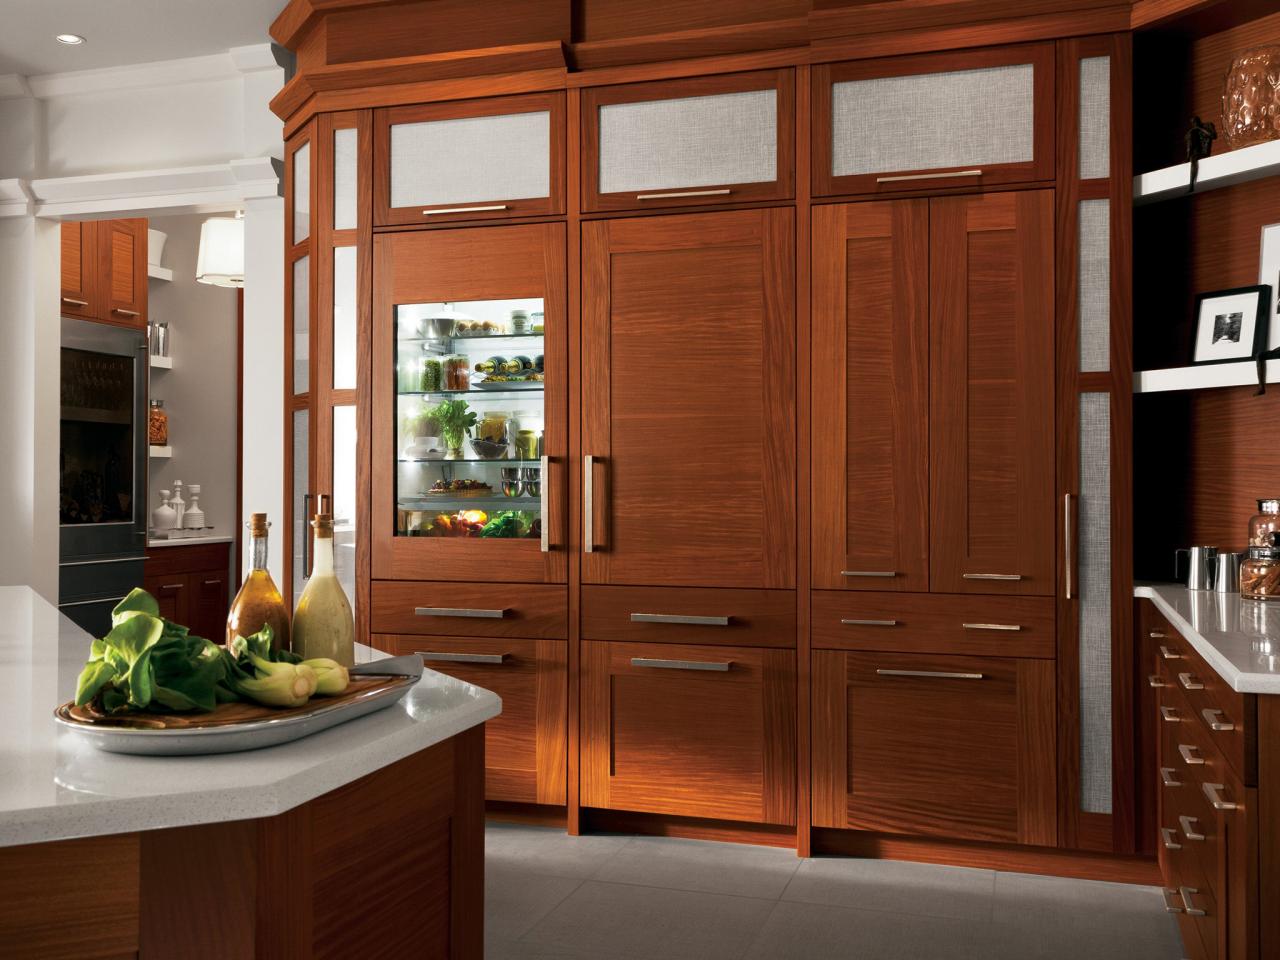 Custom Kitchen Cabinets Pictures, What Is The Most Expensive Wood For Cabinets